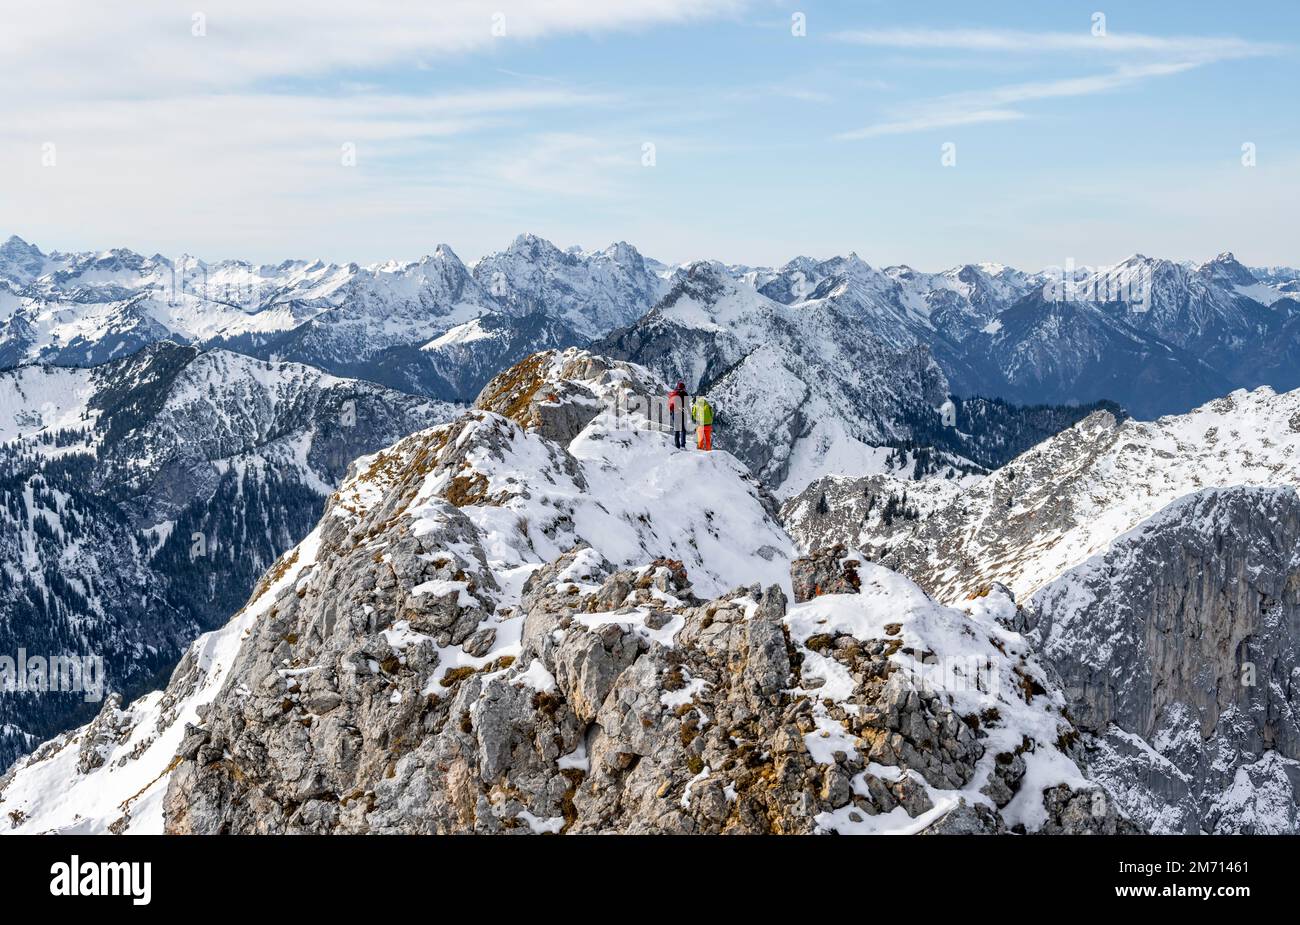 Climbers on the summit ridge, hiking to the Ammergauer Hochplatte in the Ammergau Alps in winter, snow-covered mountains, Bavaria, Germany Stock Photo